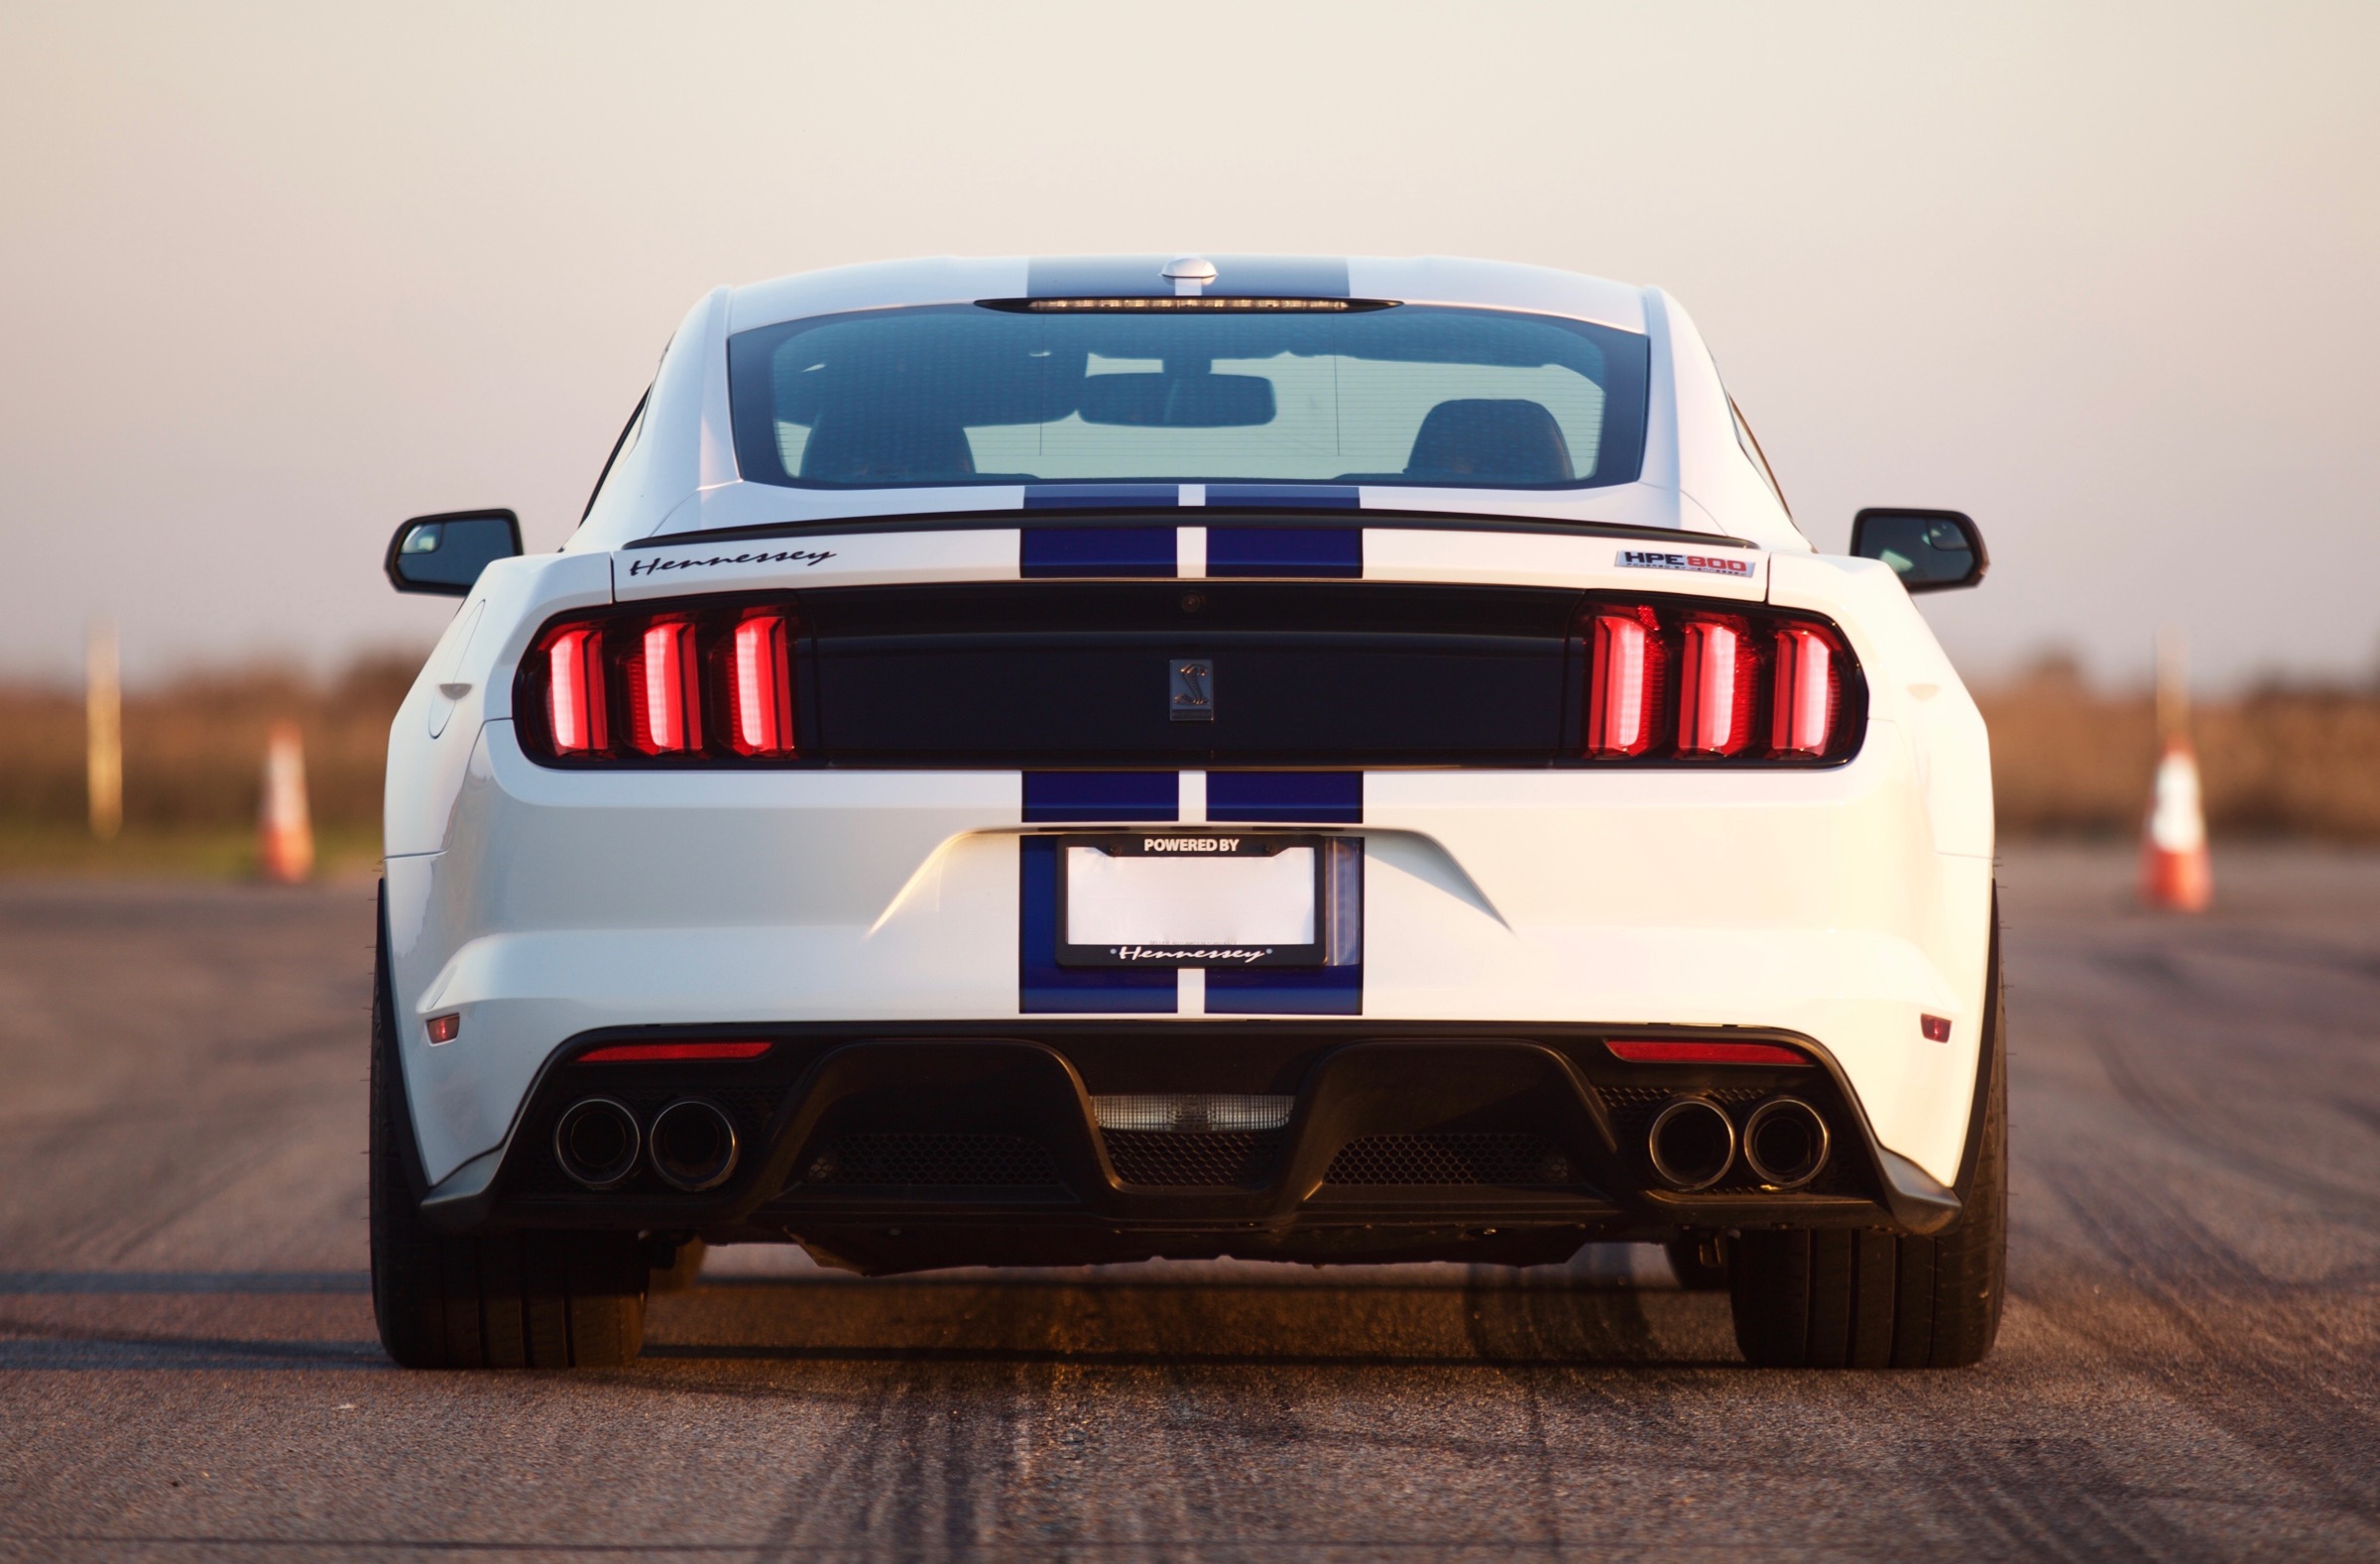 Ford Mustang Shelby GT350 Backgrounds, Compatible - PC, Mobile, Gadgets| 2400x1577 px